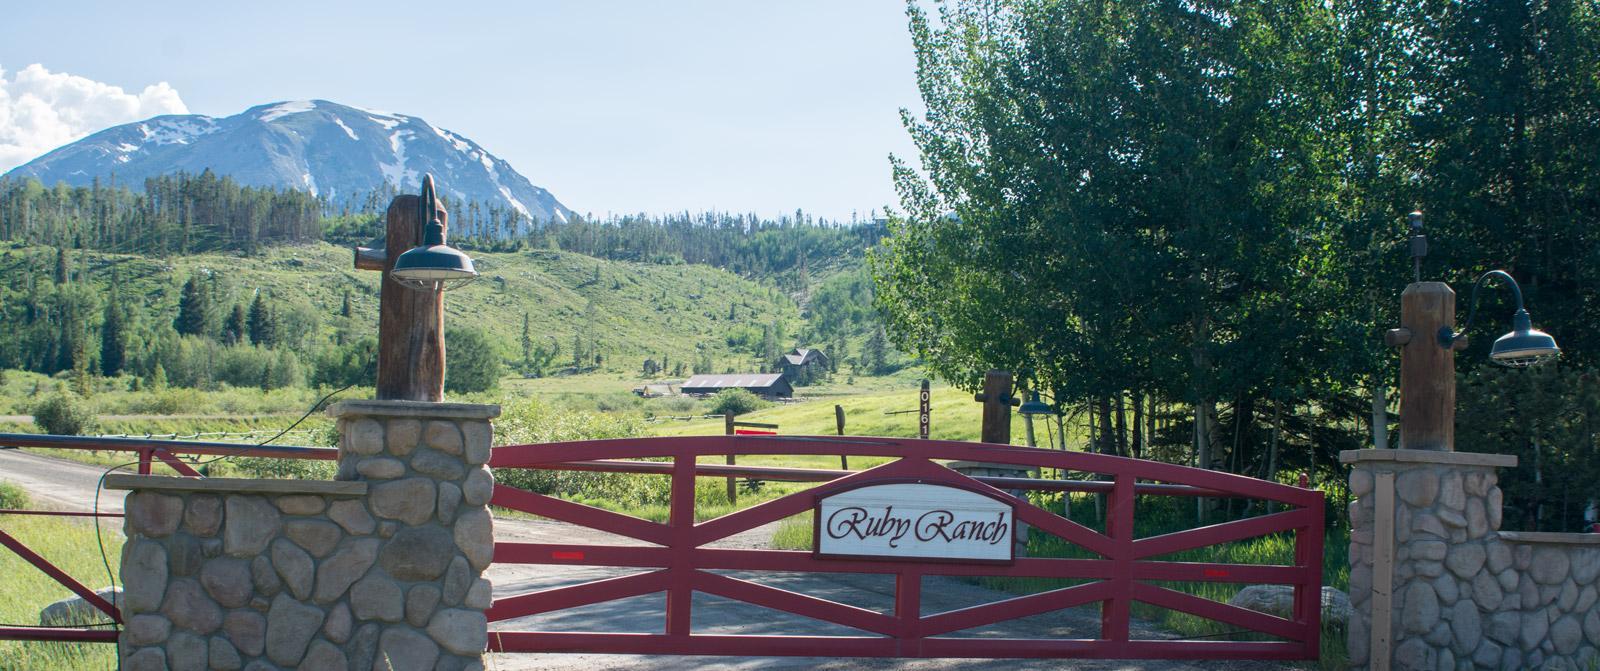 Ruby Ranch, above Silverhthorne backing national forest